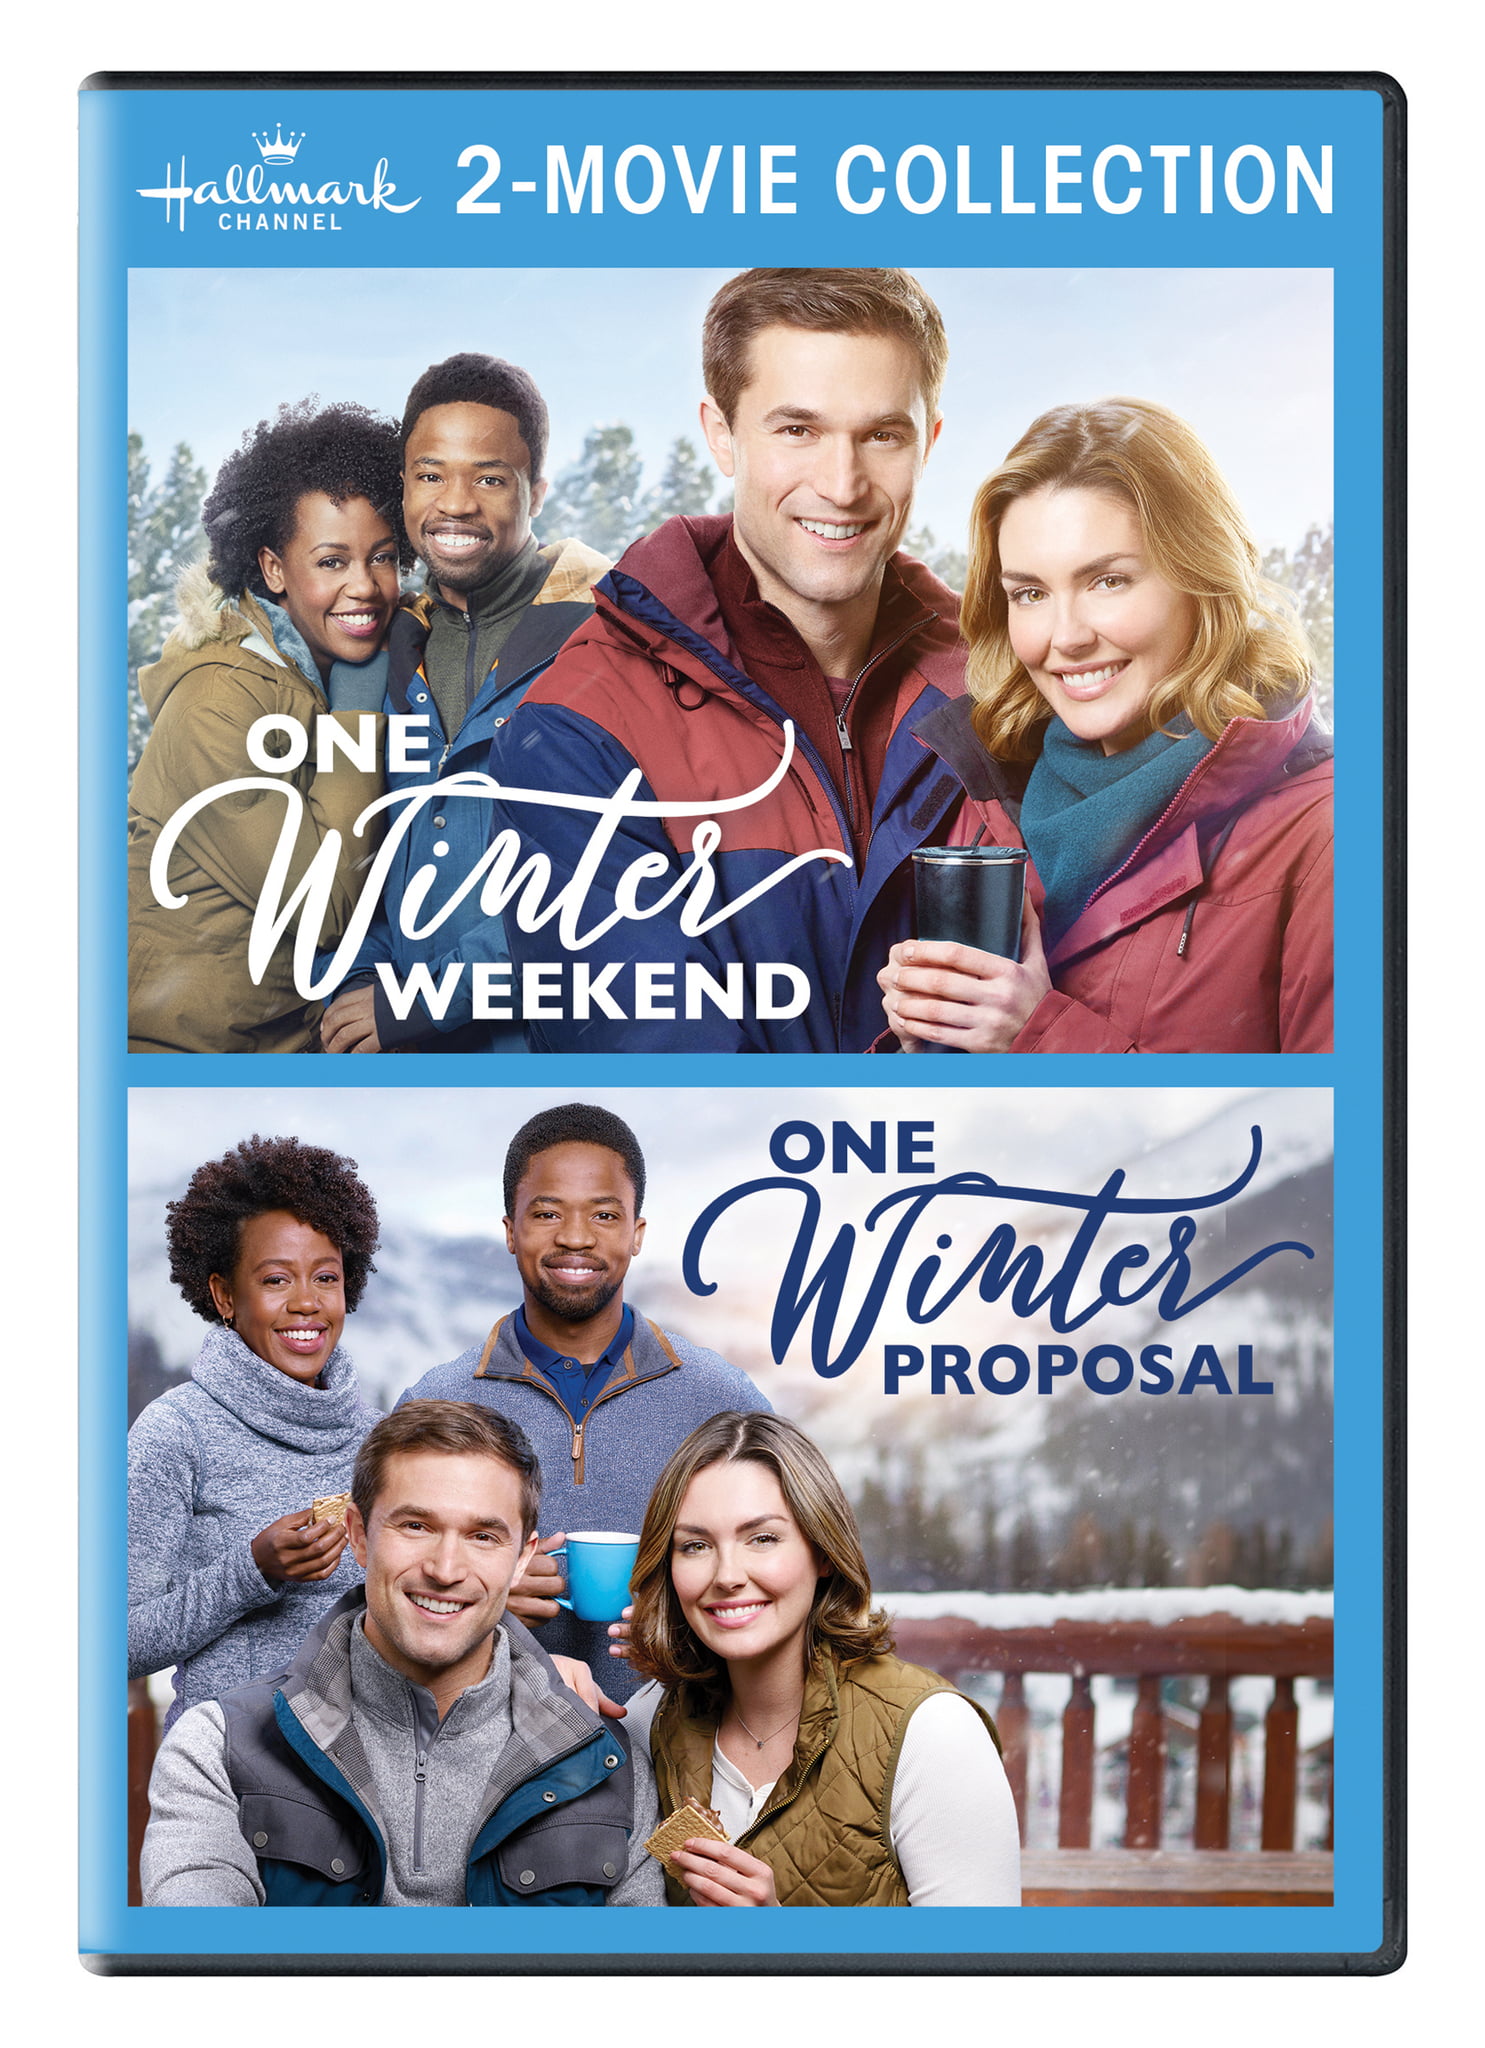 Hallmark 2Movie Collection Winter Weekend And One Winter Proposal